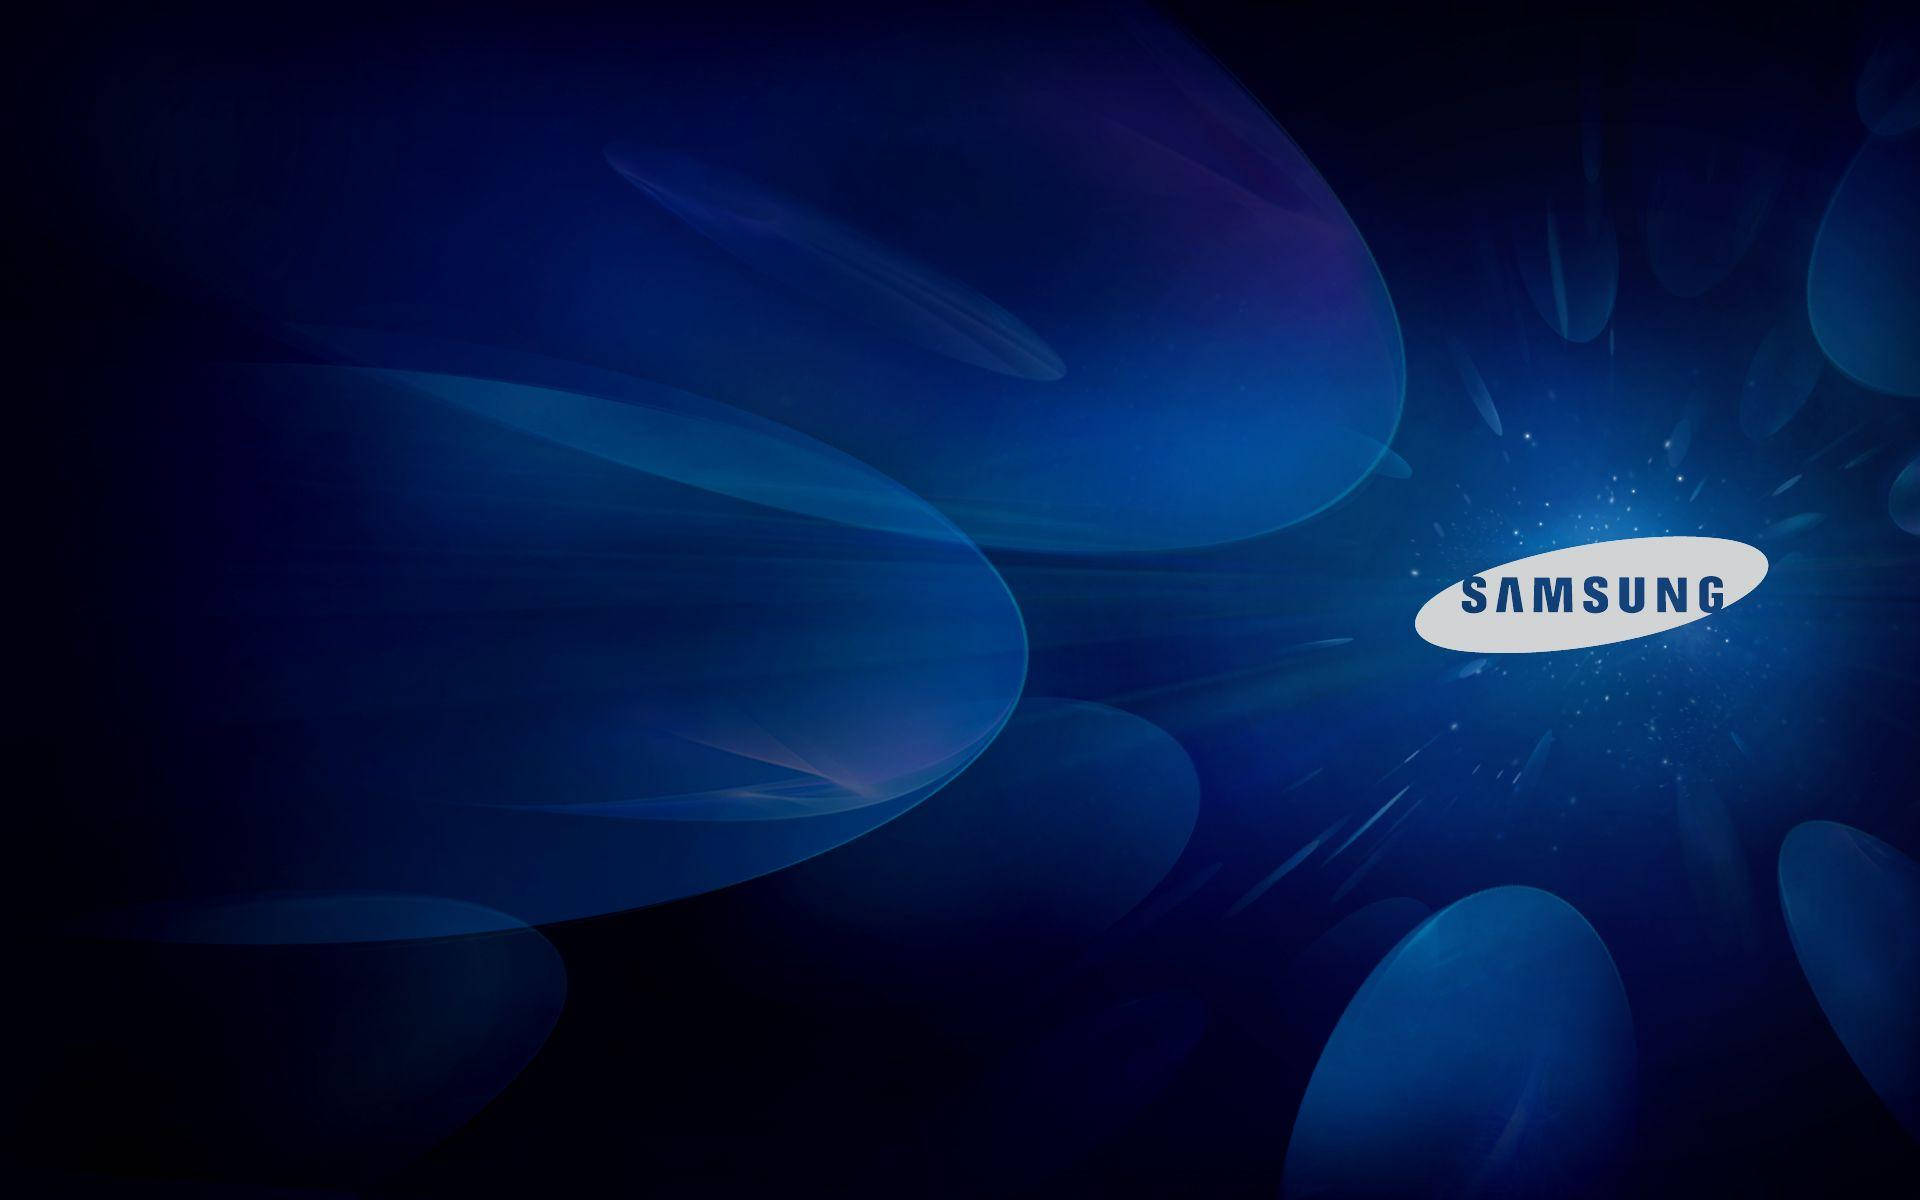 Samsung Logo On Galaxy Tablet Picture